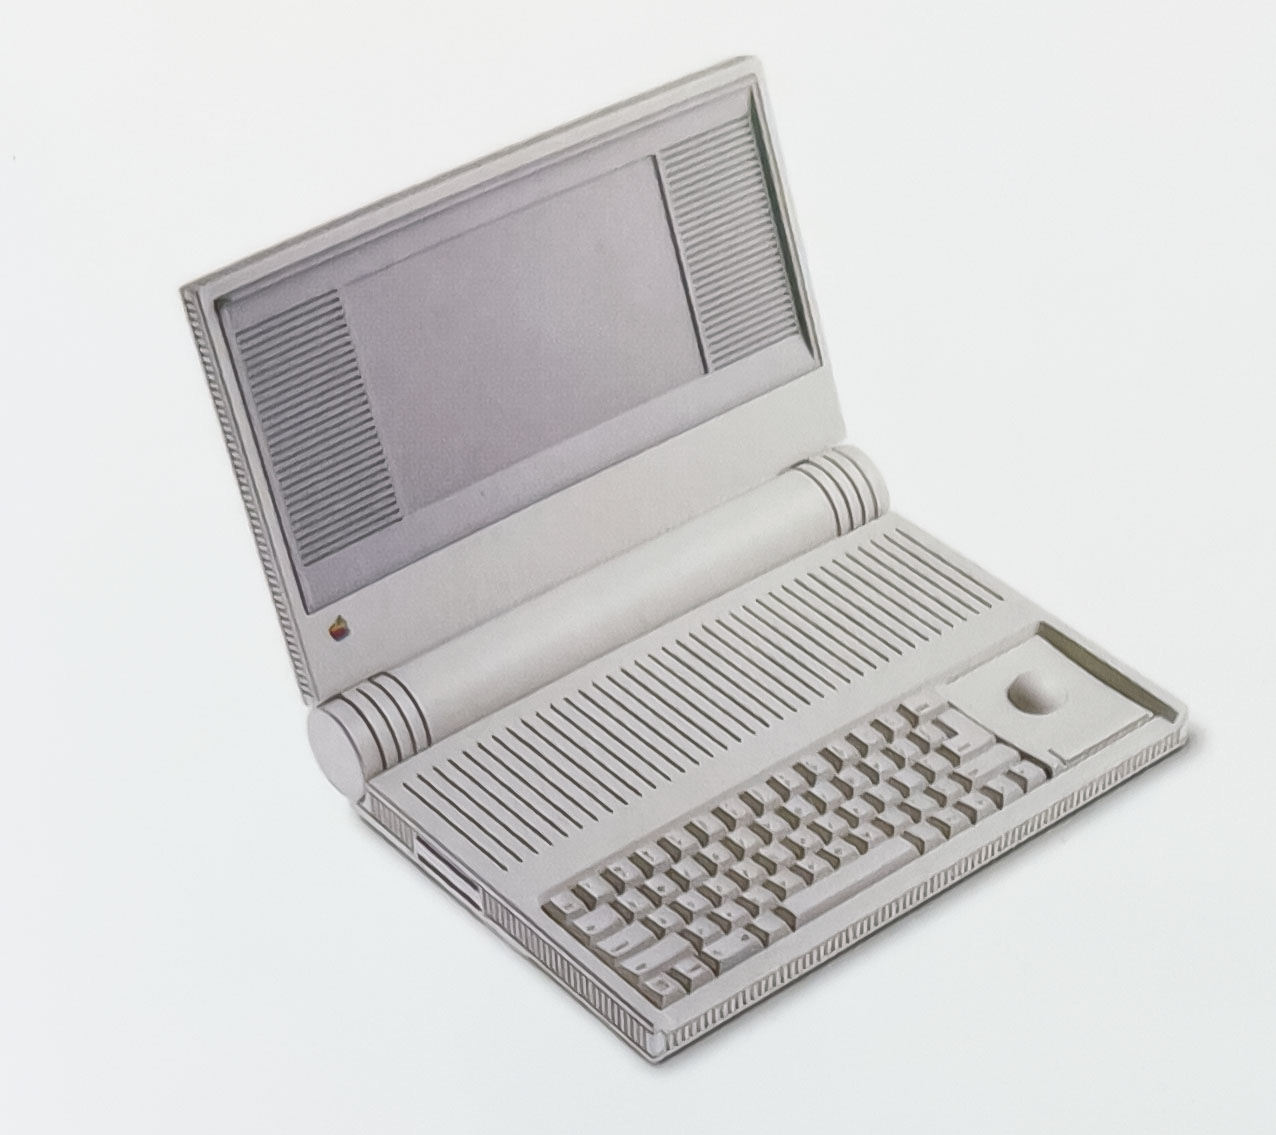 A prototype design for a clamshell laptop Mac with a small LCD screen and integrated trackball